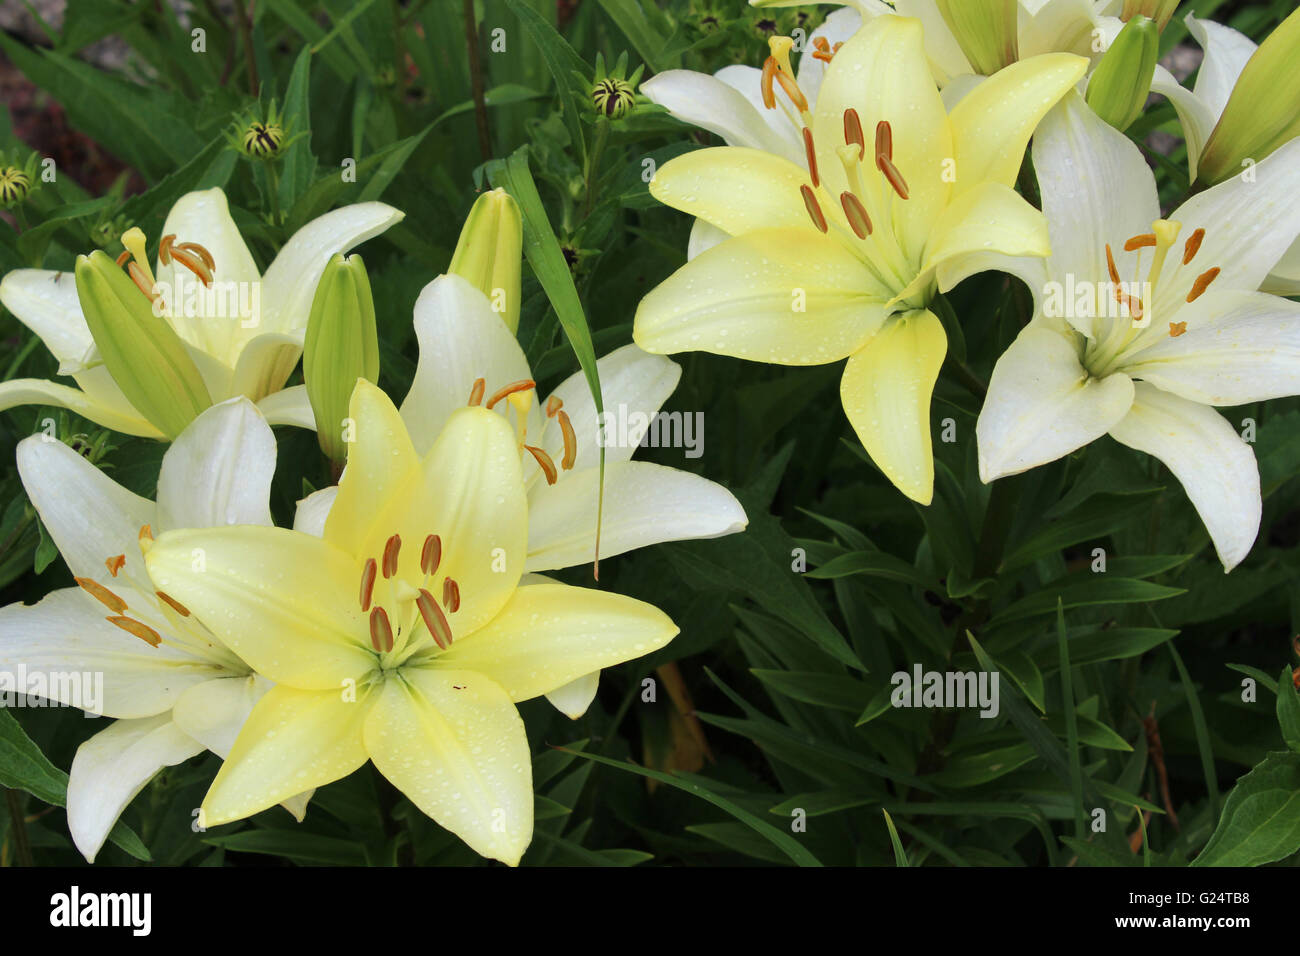 A daylily is a flowering plant in the genus Hemerocallis. Stock Photo